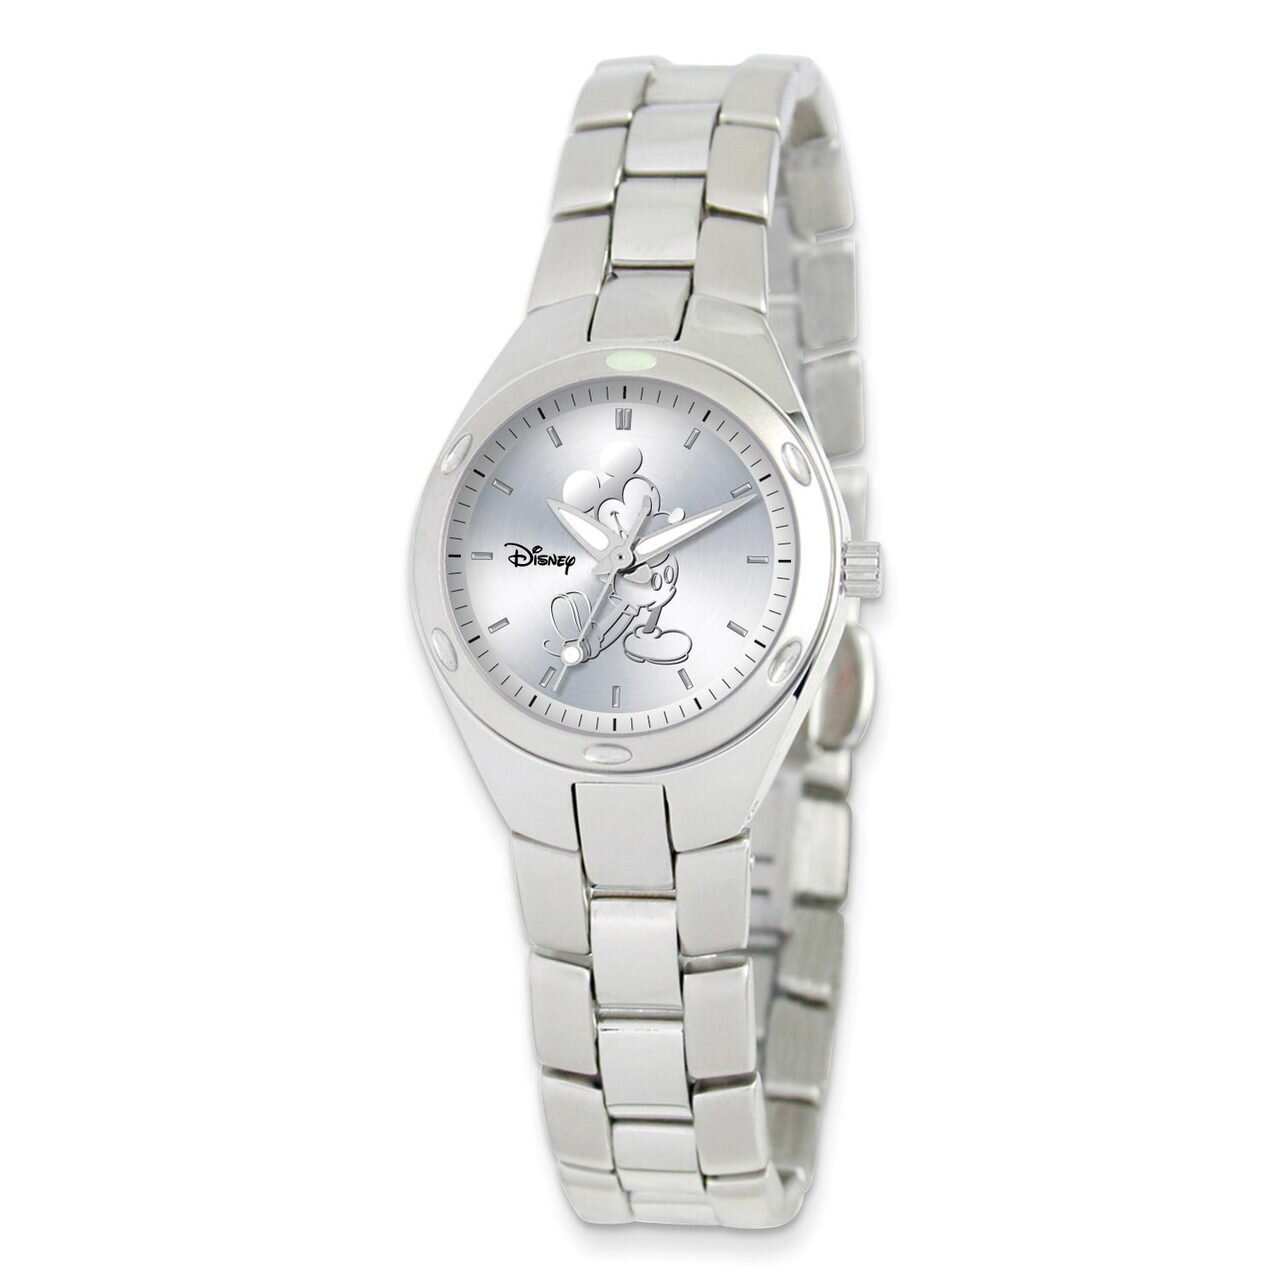 Disney Stainless Steel Round Silver Dial Mickey Mouse Watch Adult Size XWA4399